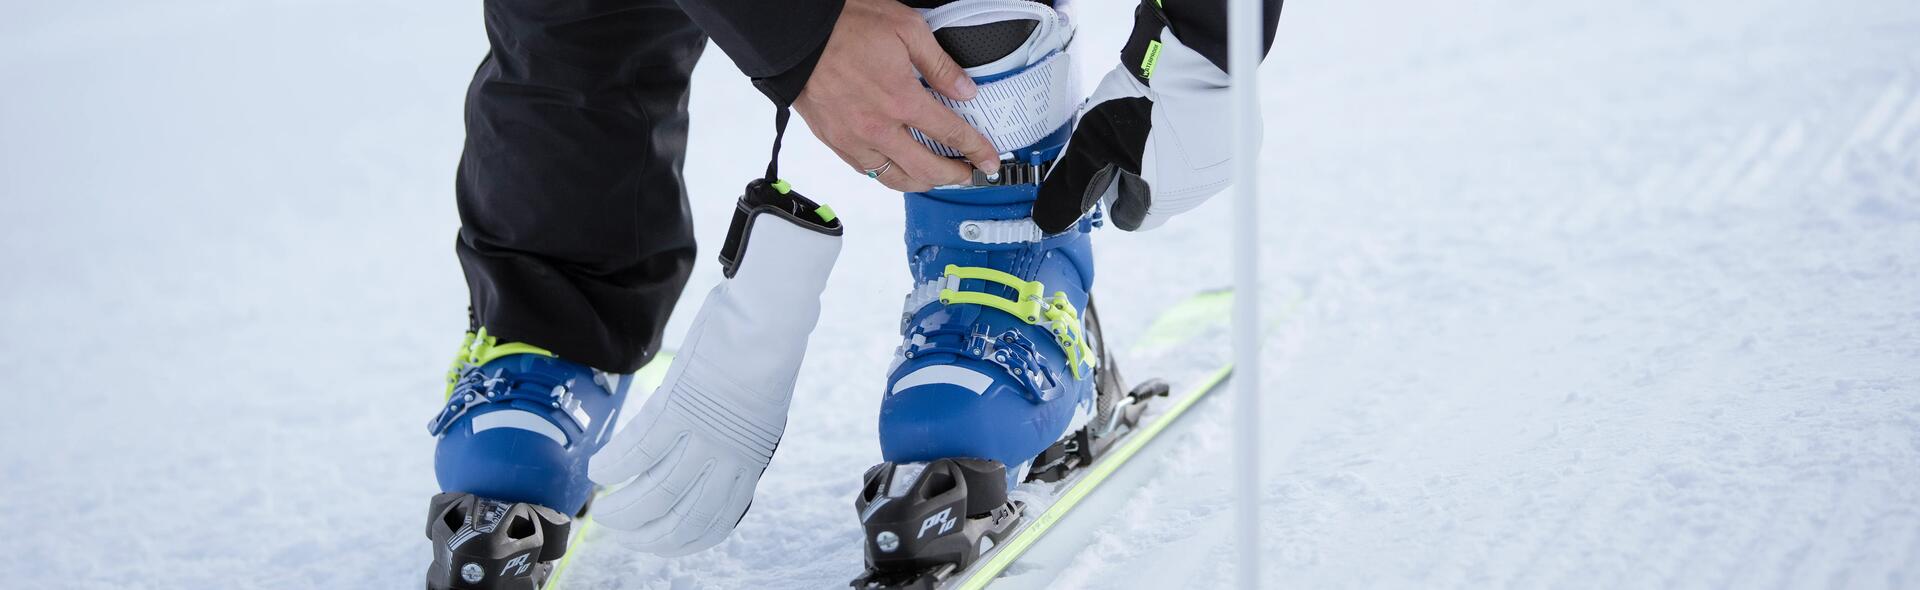 How to tighten the buckles on ski boots - title 